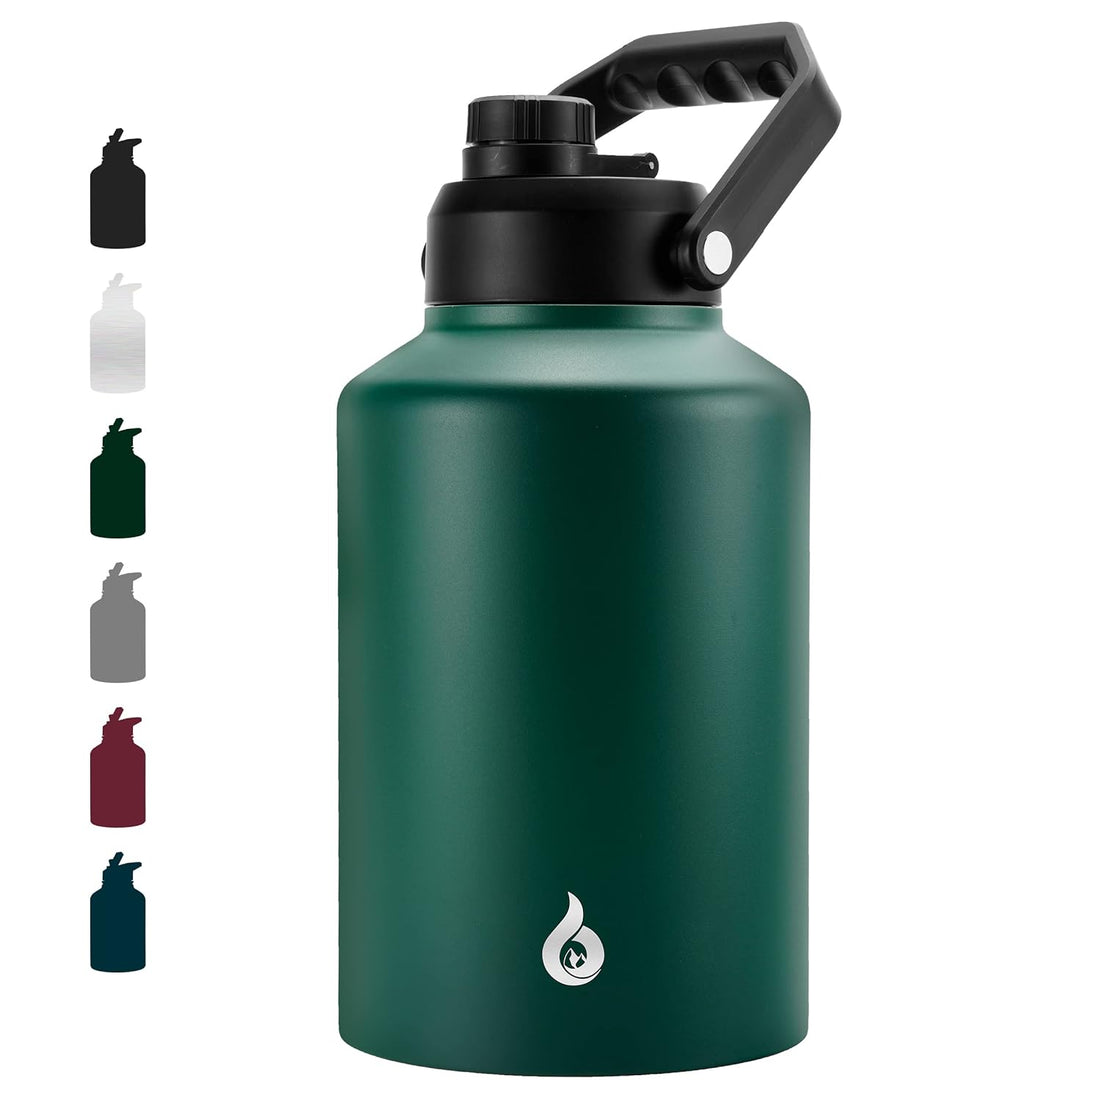 Insulated water bottle 128oz Army Green with anti-slip bottom